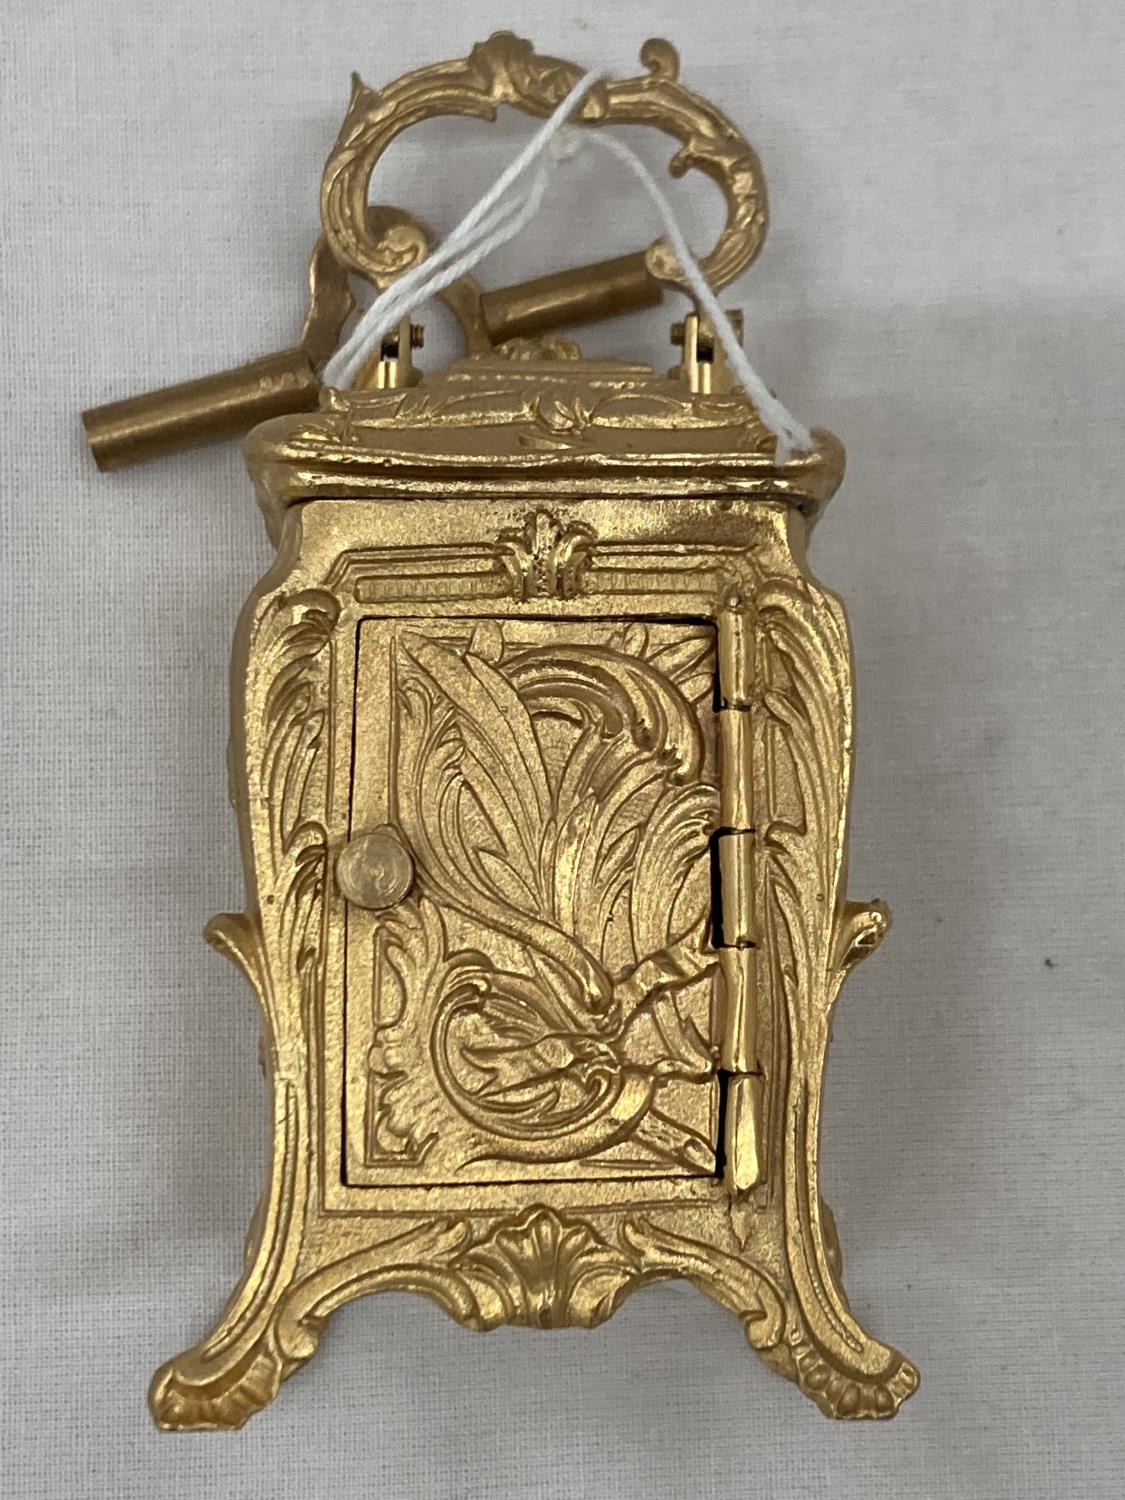 A MINIATURE GILDED FRENCH CLOCK WITH KEY HEIGHT 3.5" SEEN WORKING BUT NO WARRANTY - Image 3 of 6